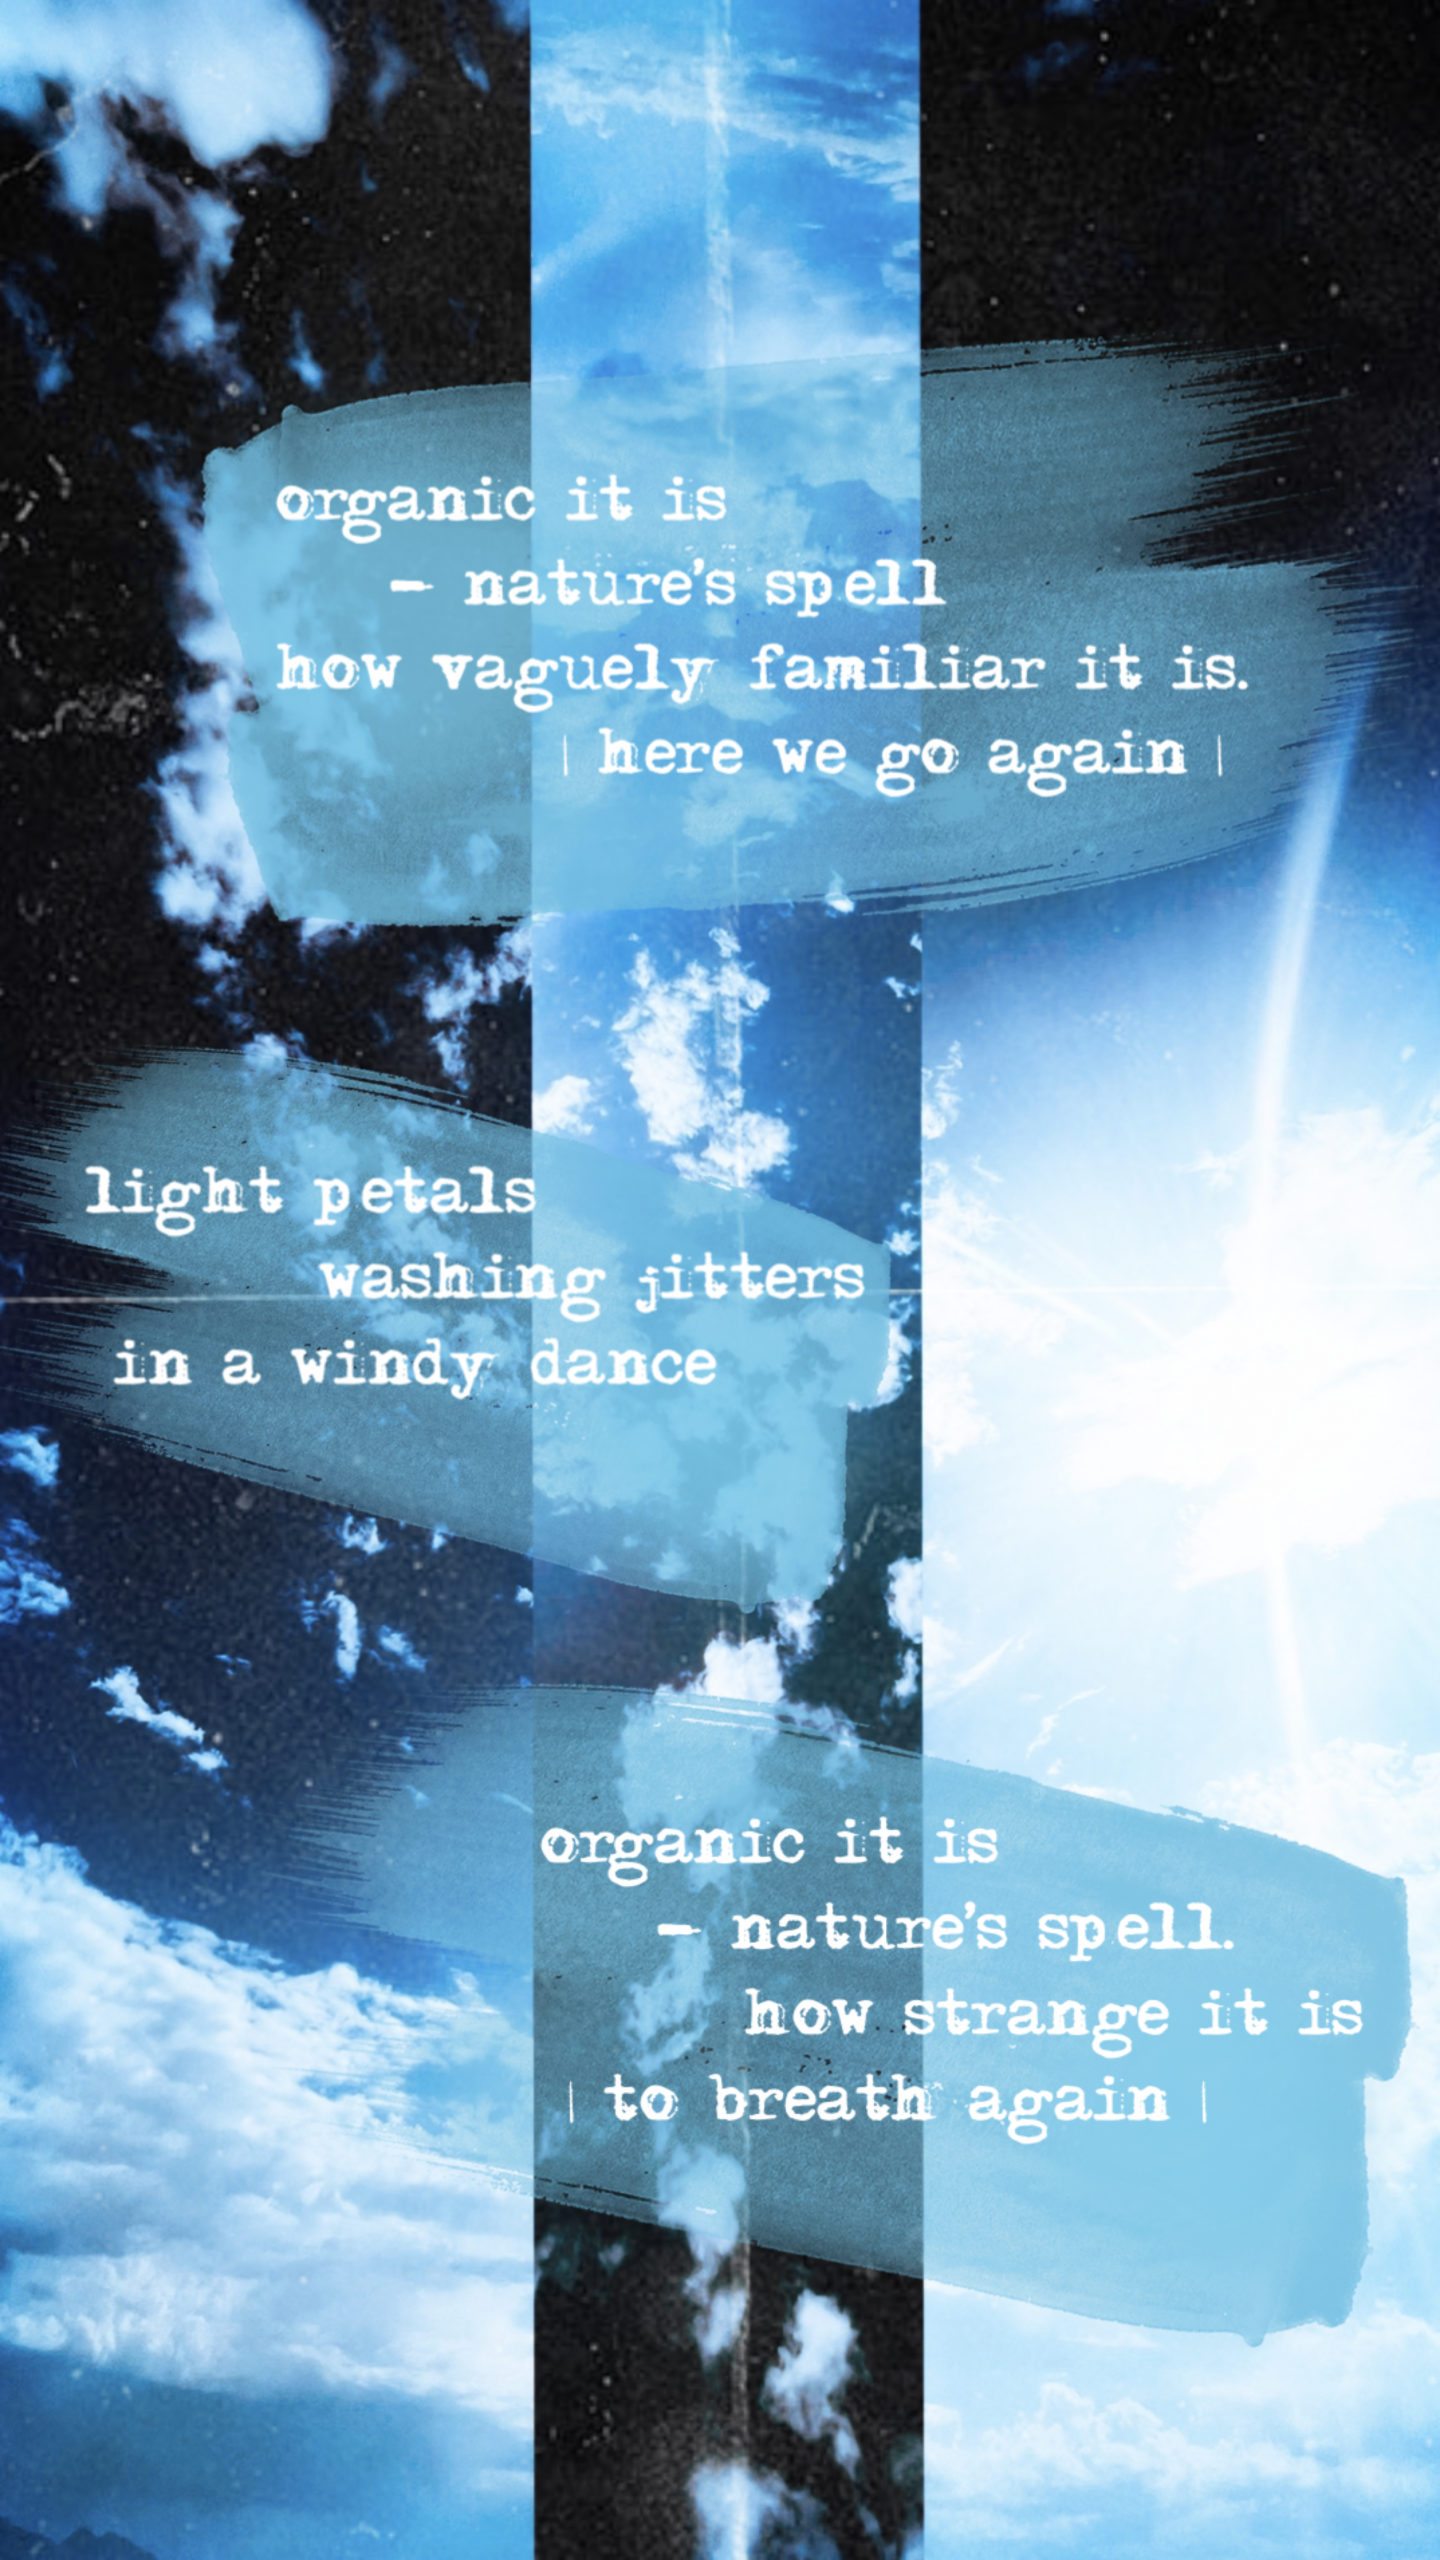 || light petals ||</p>
<p>organic it is<br />
- nature’s spell<br />
how vaguely familiar it is.<br />
         | here we go again |</p>
<p>light petals<br />
washing jitters<br />
in a windy dance</p>
<p>organic it is<br />
- nature’s spell.<br />
how strange it is<br />
         | to breath again |